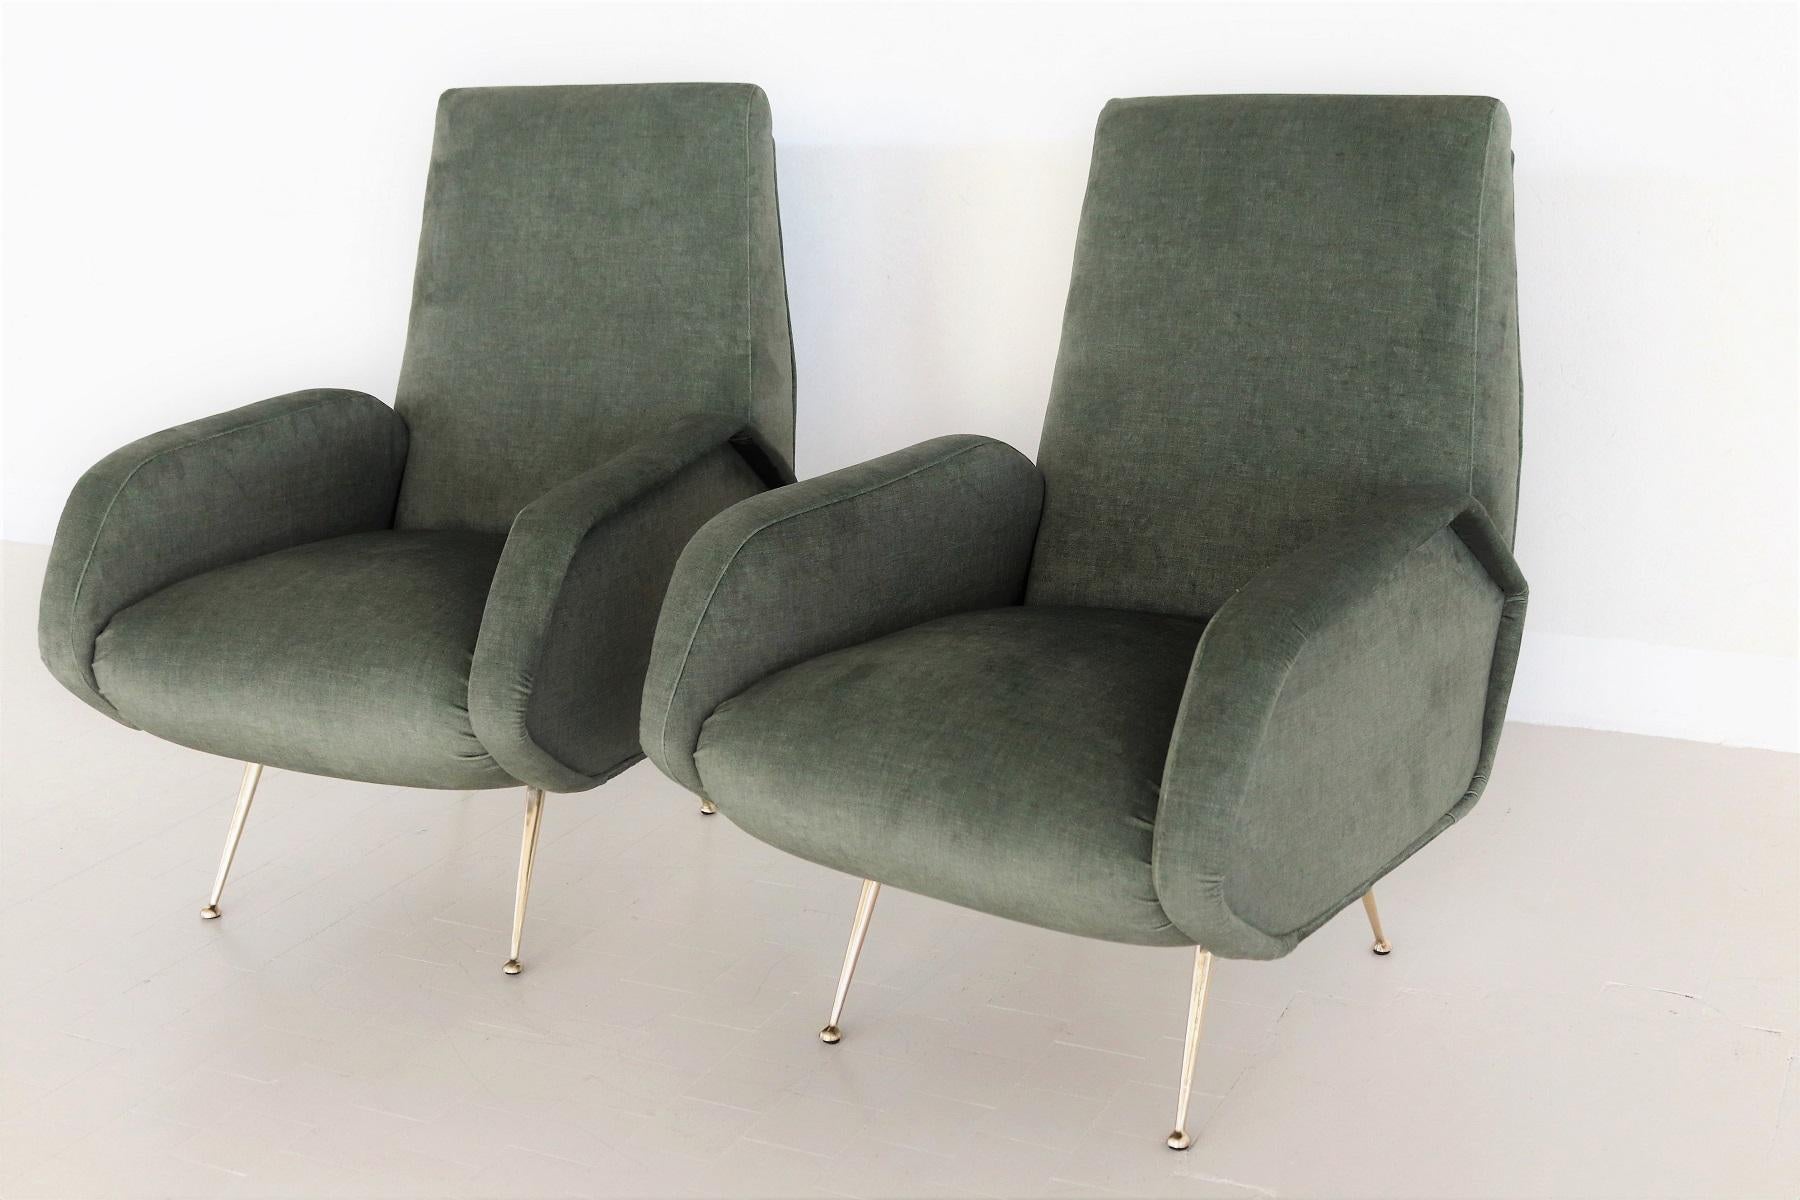 Magnificent pair of original Italian armchairs with original full brass stiletto feet from the midcentury, 1950s.
The armchairs are completely refurbished with quality material and re-upholstered with green super-soft easy-care velvet.
The